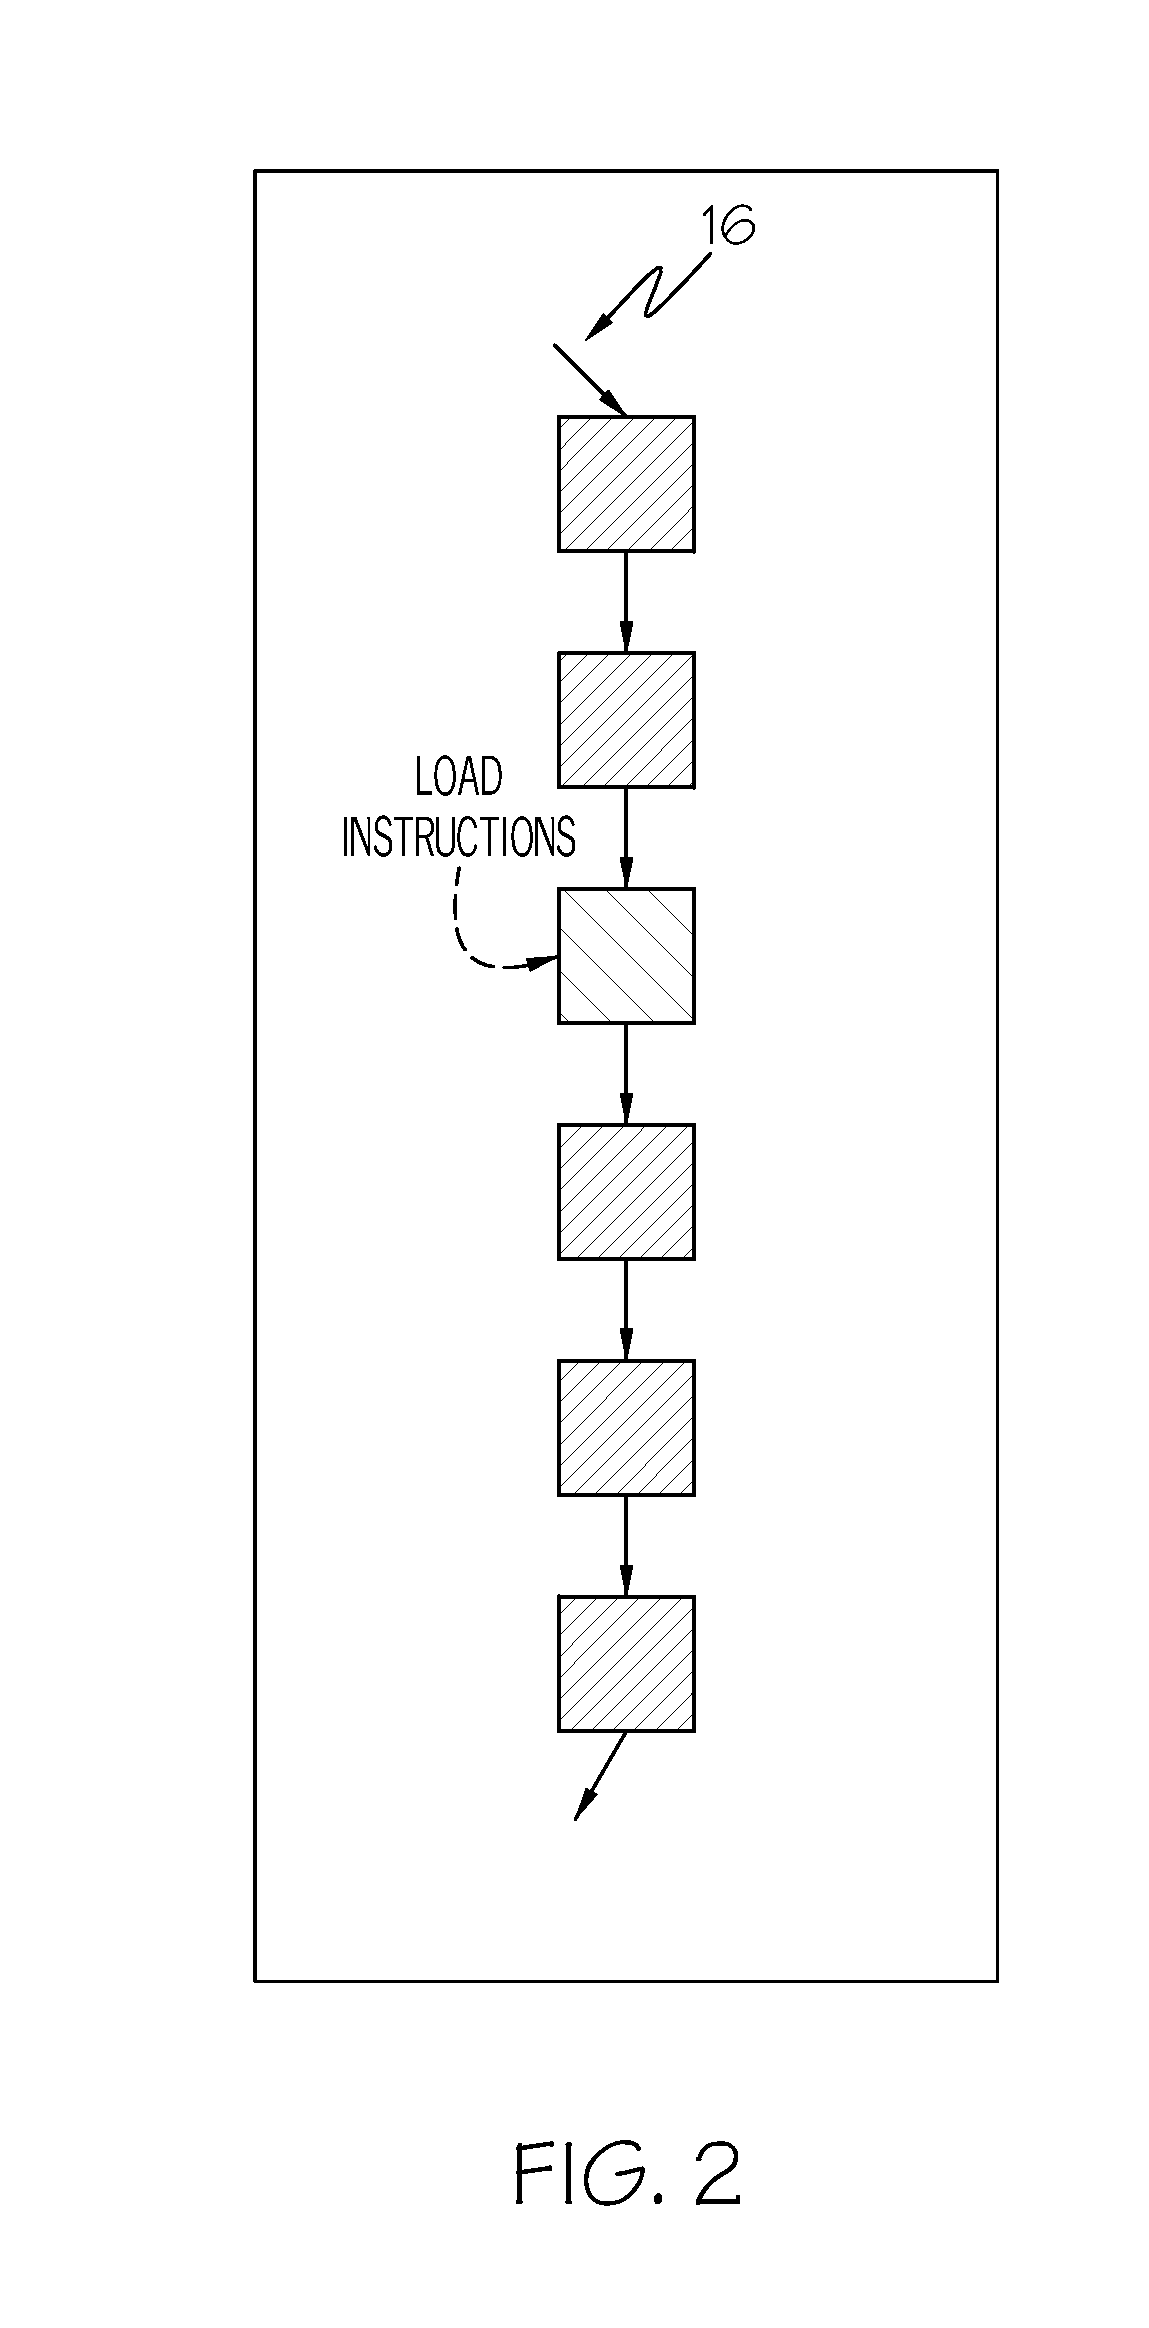 Computer processing system employing an instruction reorder buffer